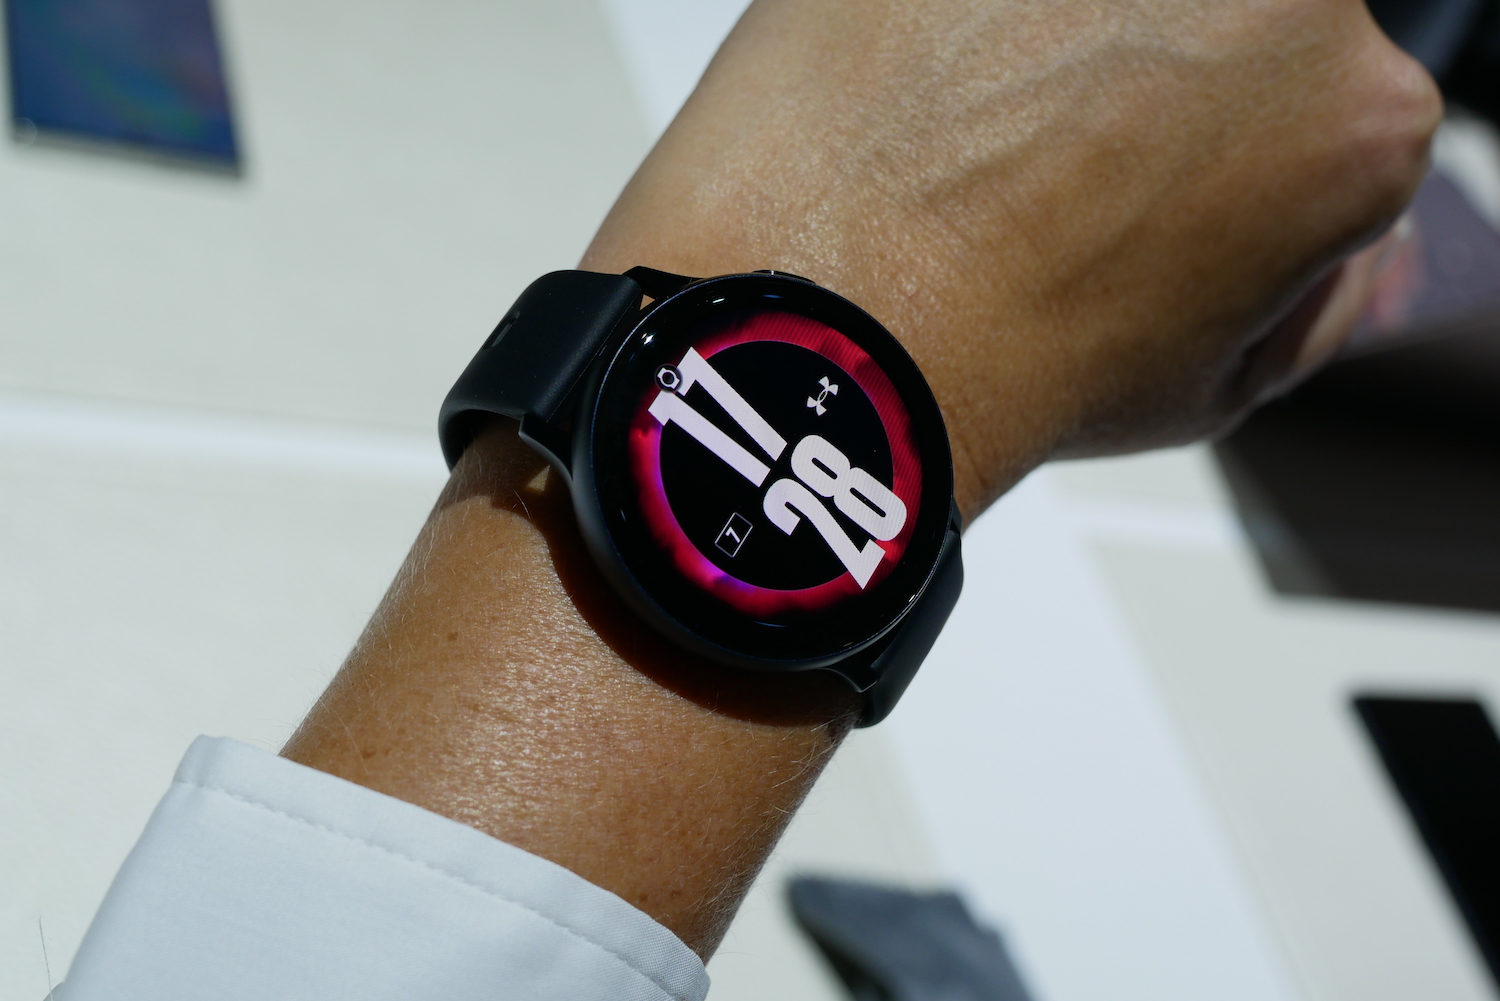 Samsung Watch Active 2 Edition Meant for HOVR Fans | Trends